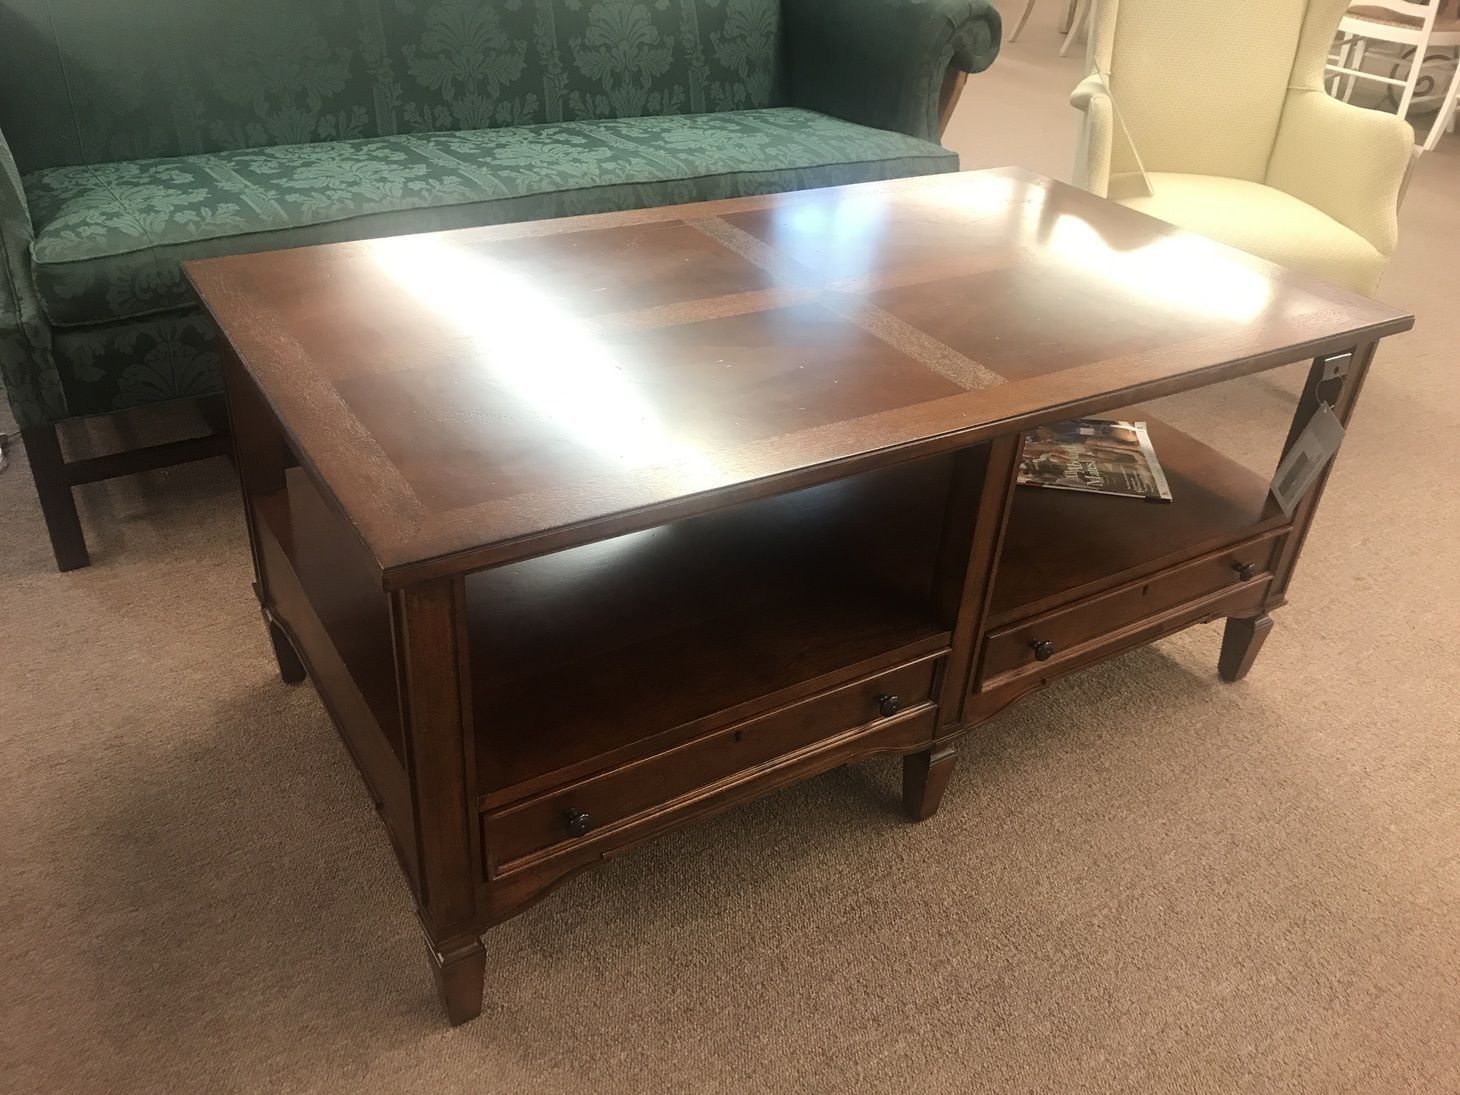 Stanley 2 Drawer Coffee Table | Delmarva Furniture Consignment Within 2 Drawer Oval Coffee Tables (View 5 of 15)